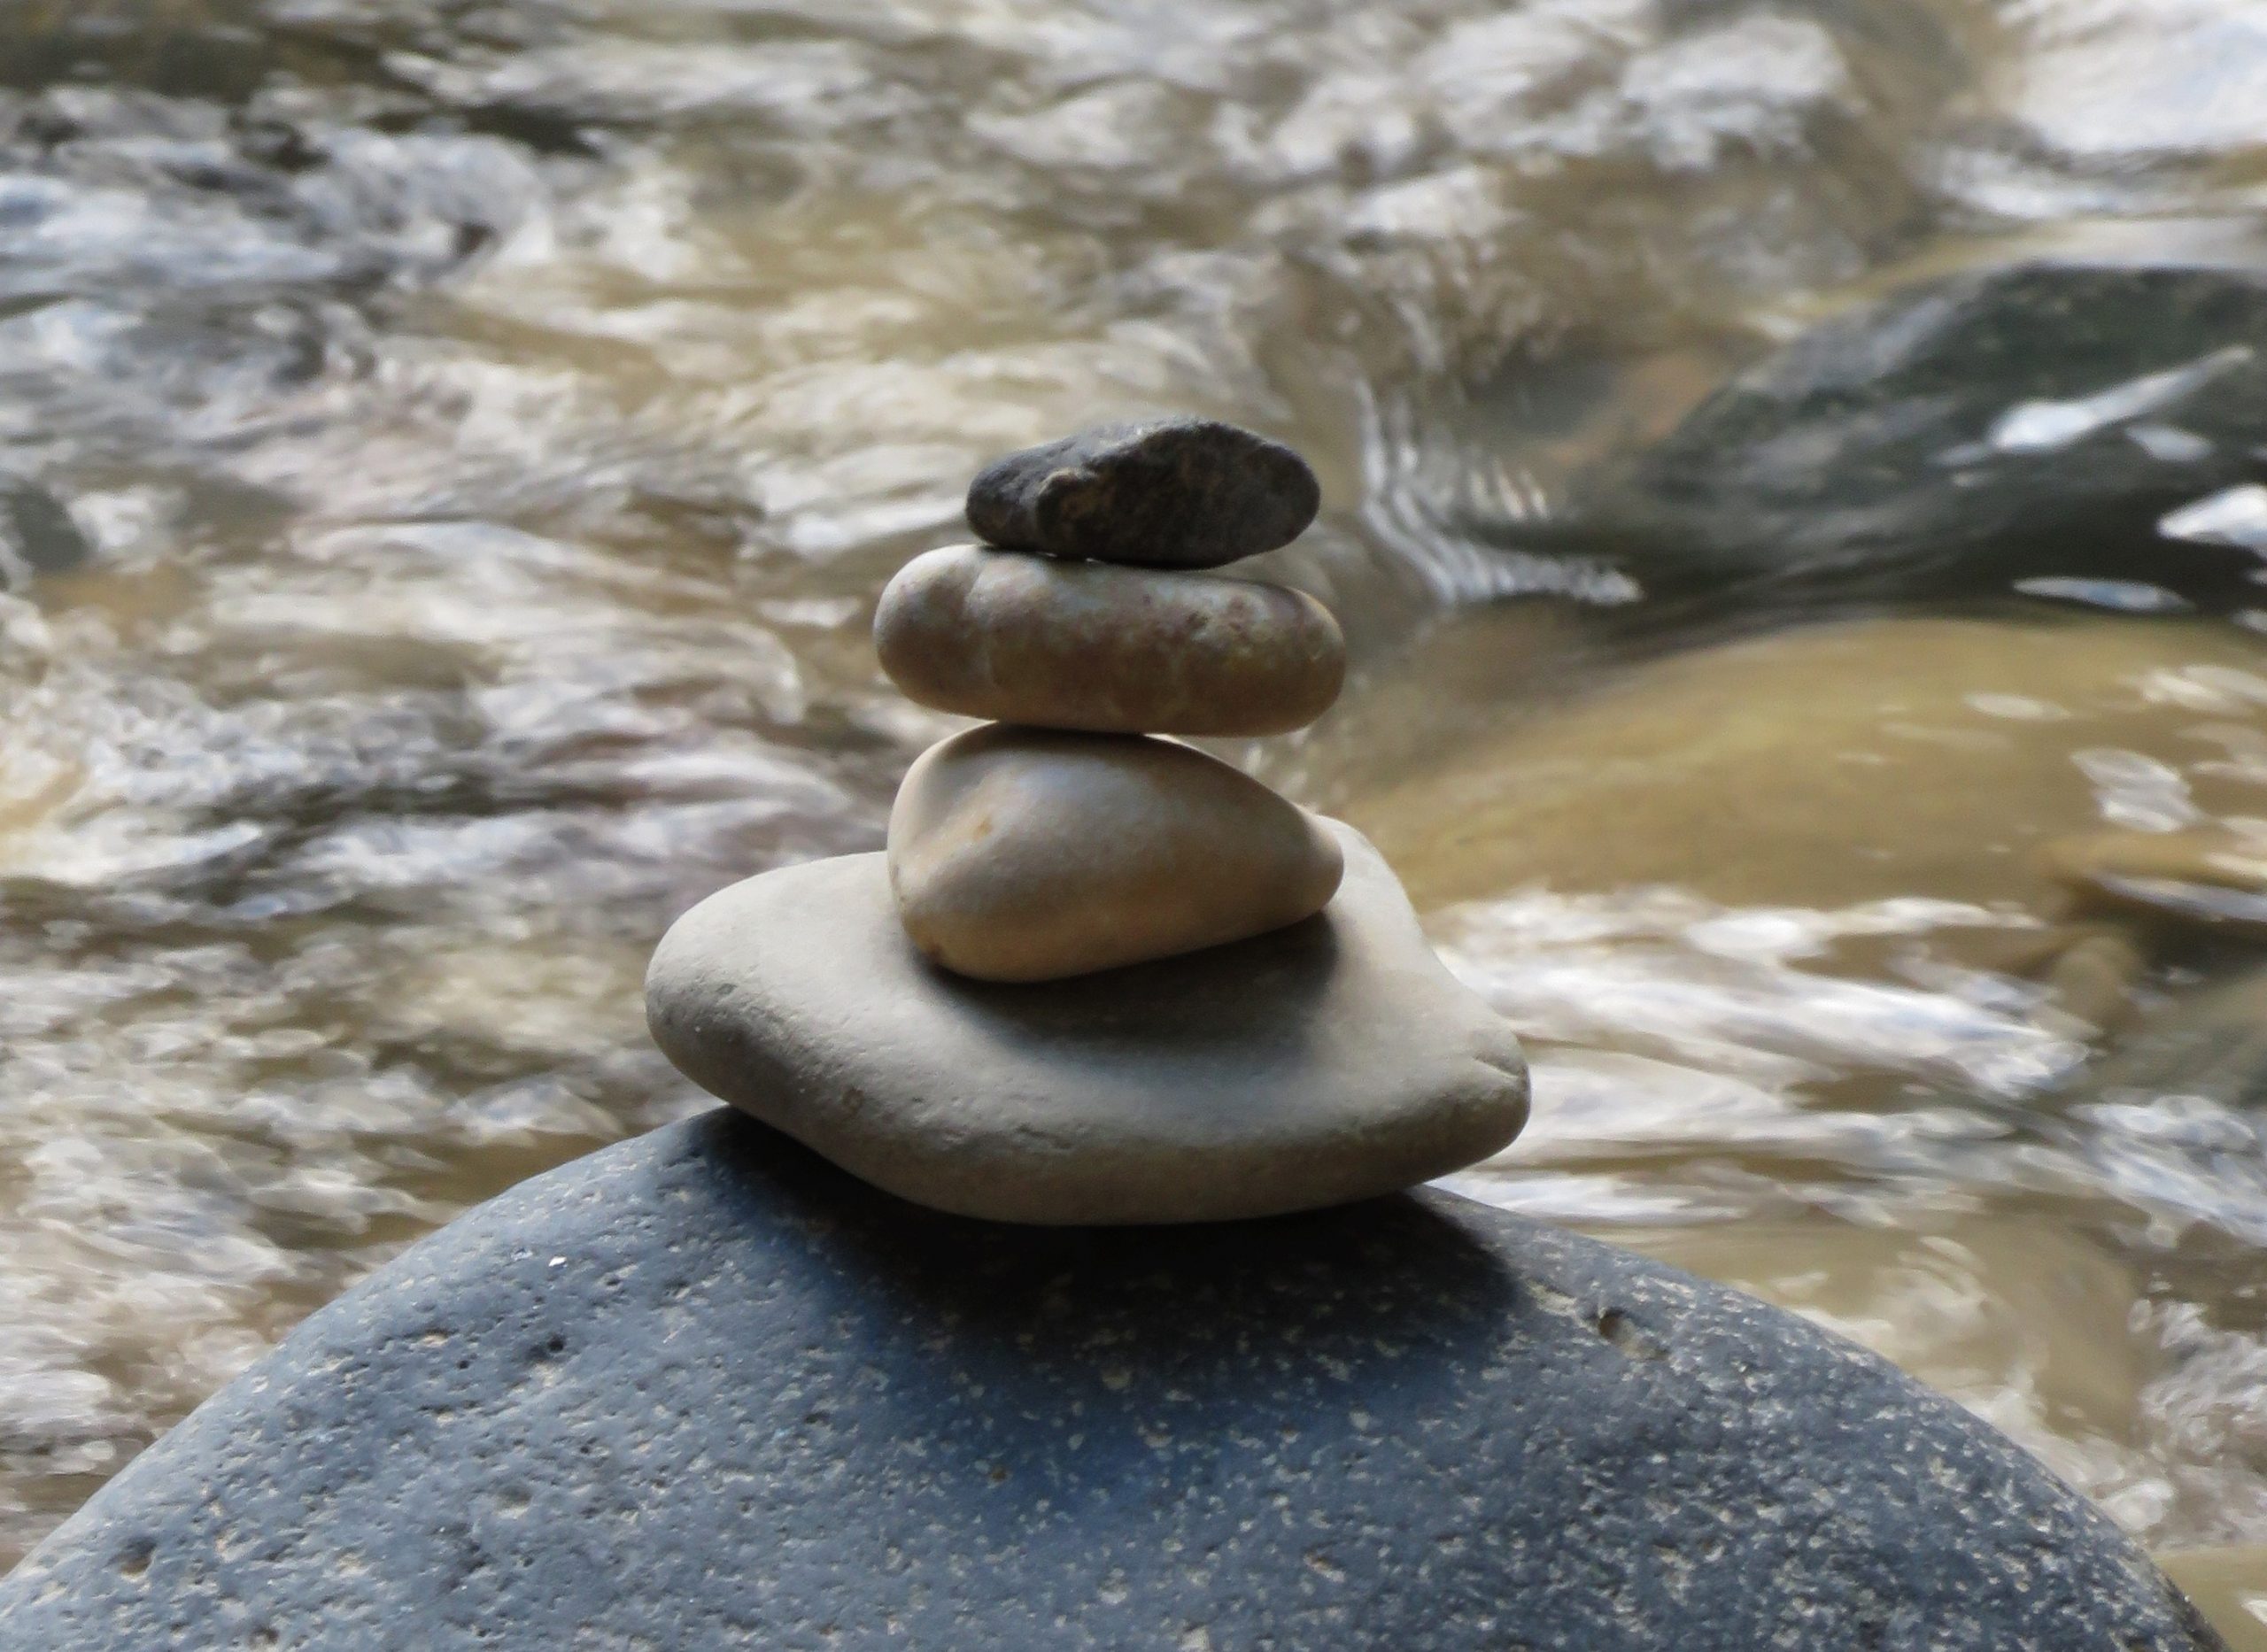 A cairn (stack of stones) sitting in front of a running river. Cairn is steady, river is flowing.